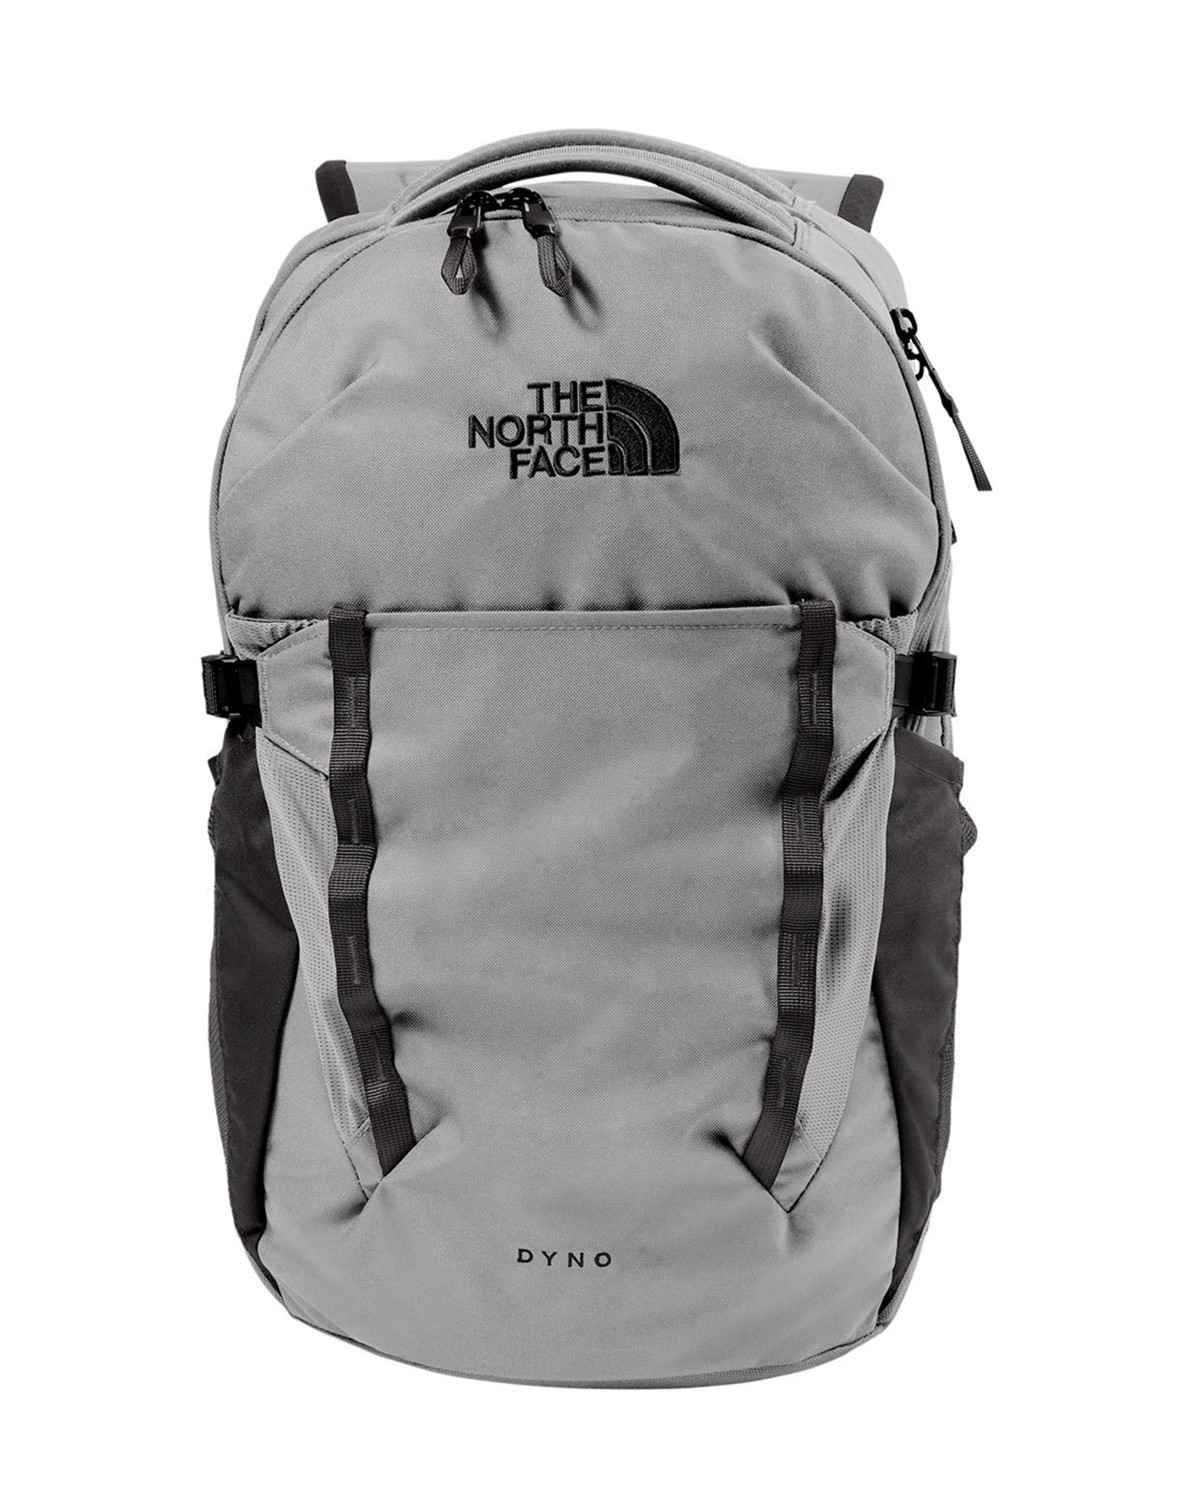 Reviews about The North Face Dyno Backpack.